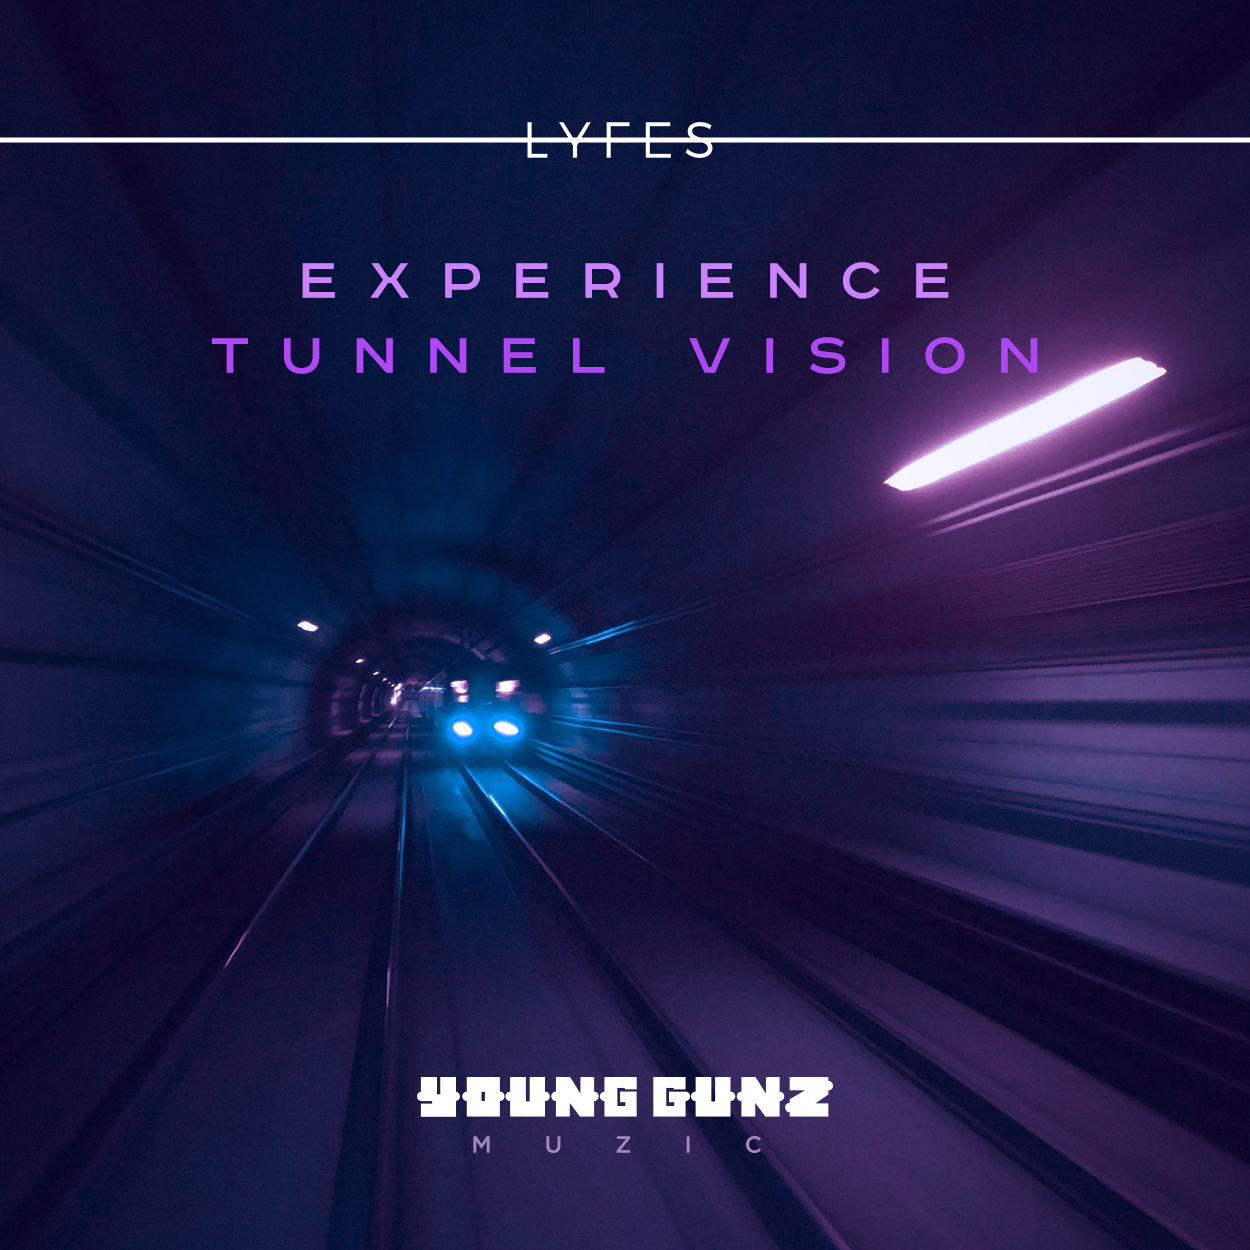 tunnelvision_ep_lyfes_website_01